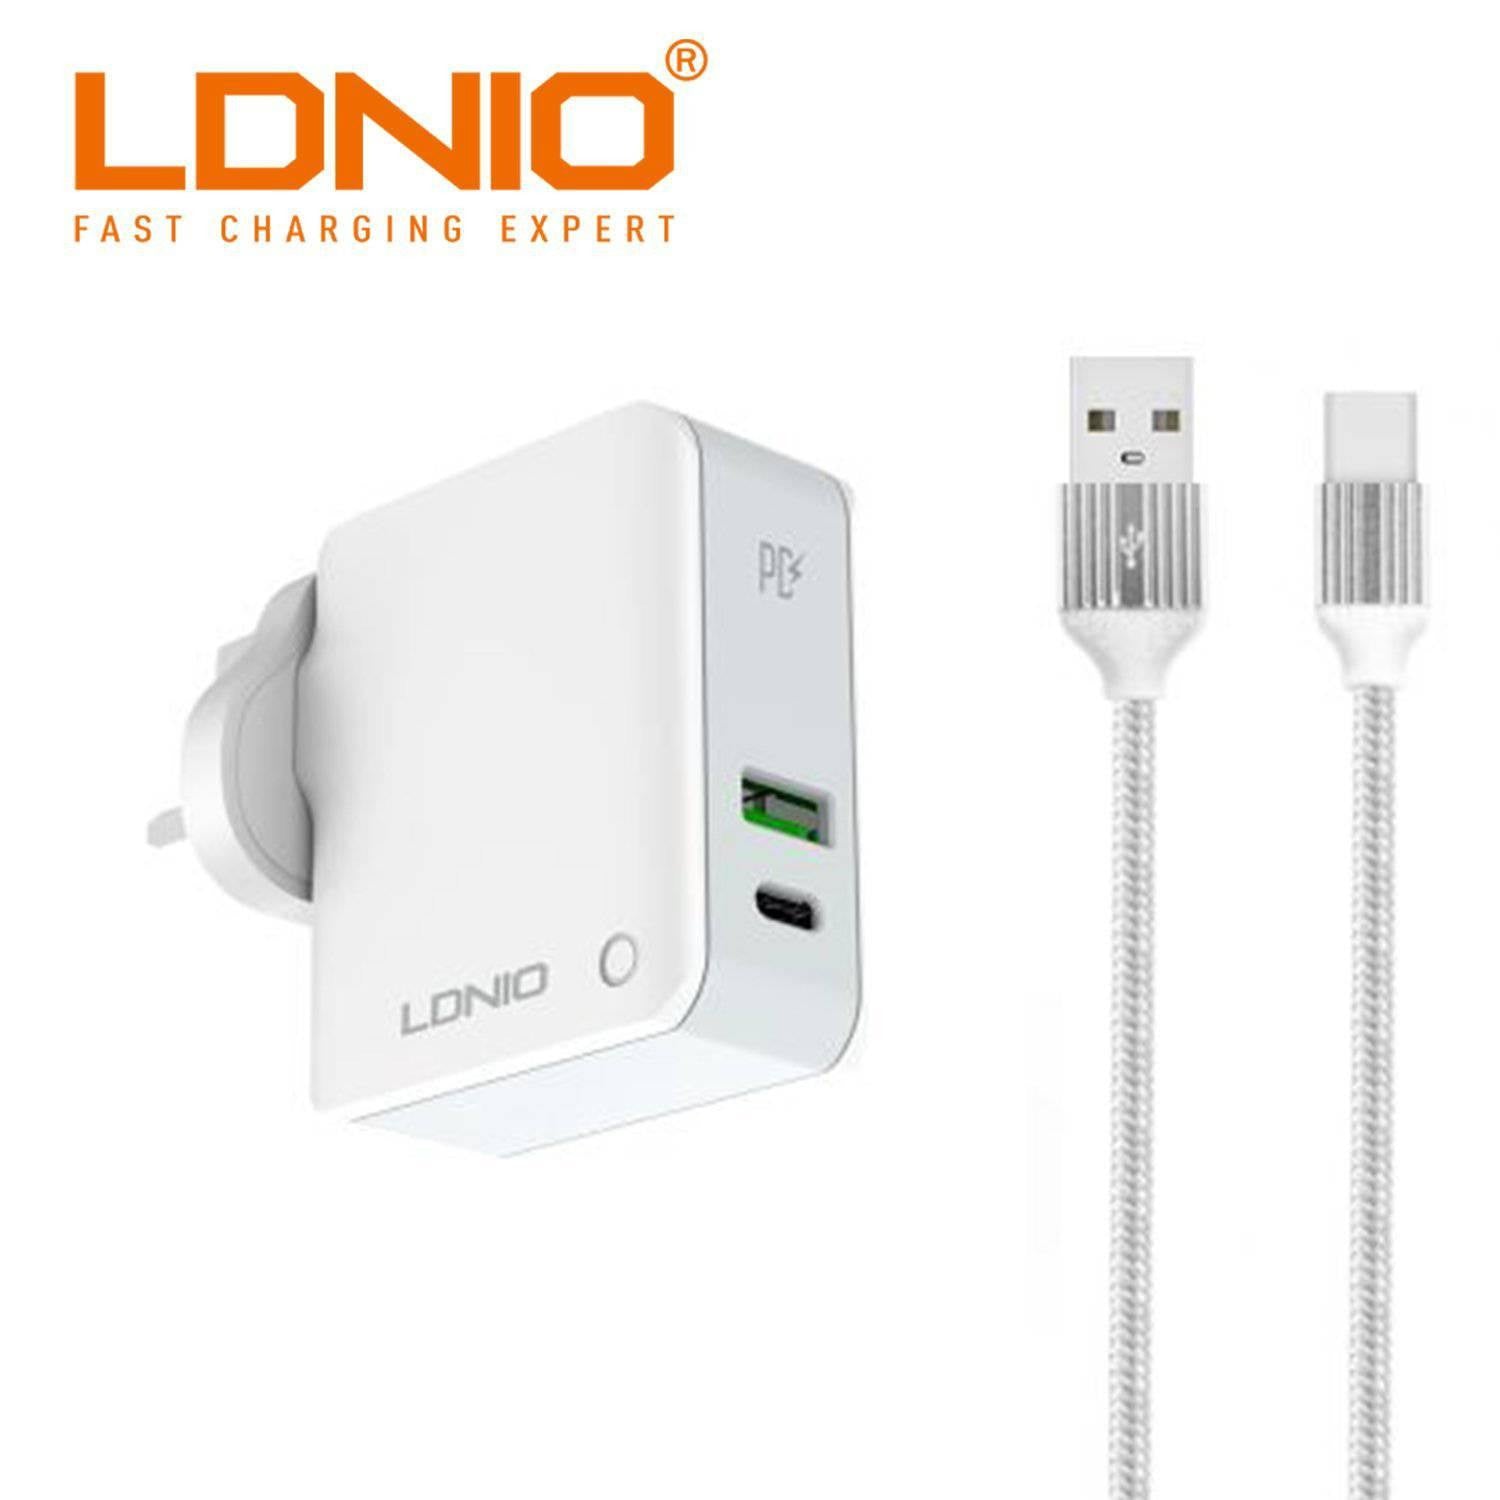 LDNIO CHARGER OUTPUT TYPE C FAST CHARGING 30W | Shopna Online Store .